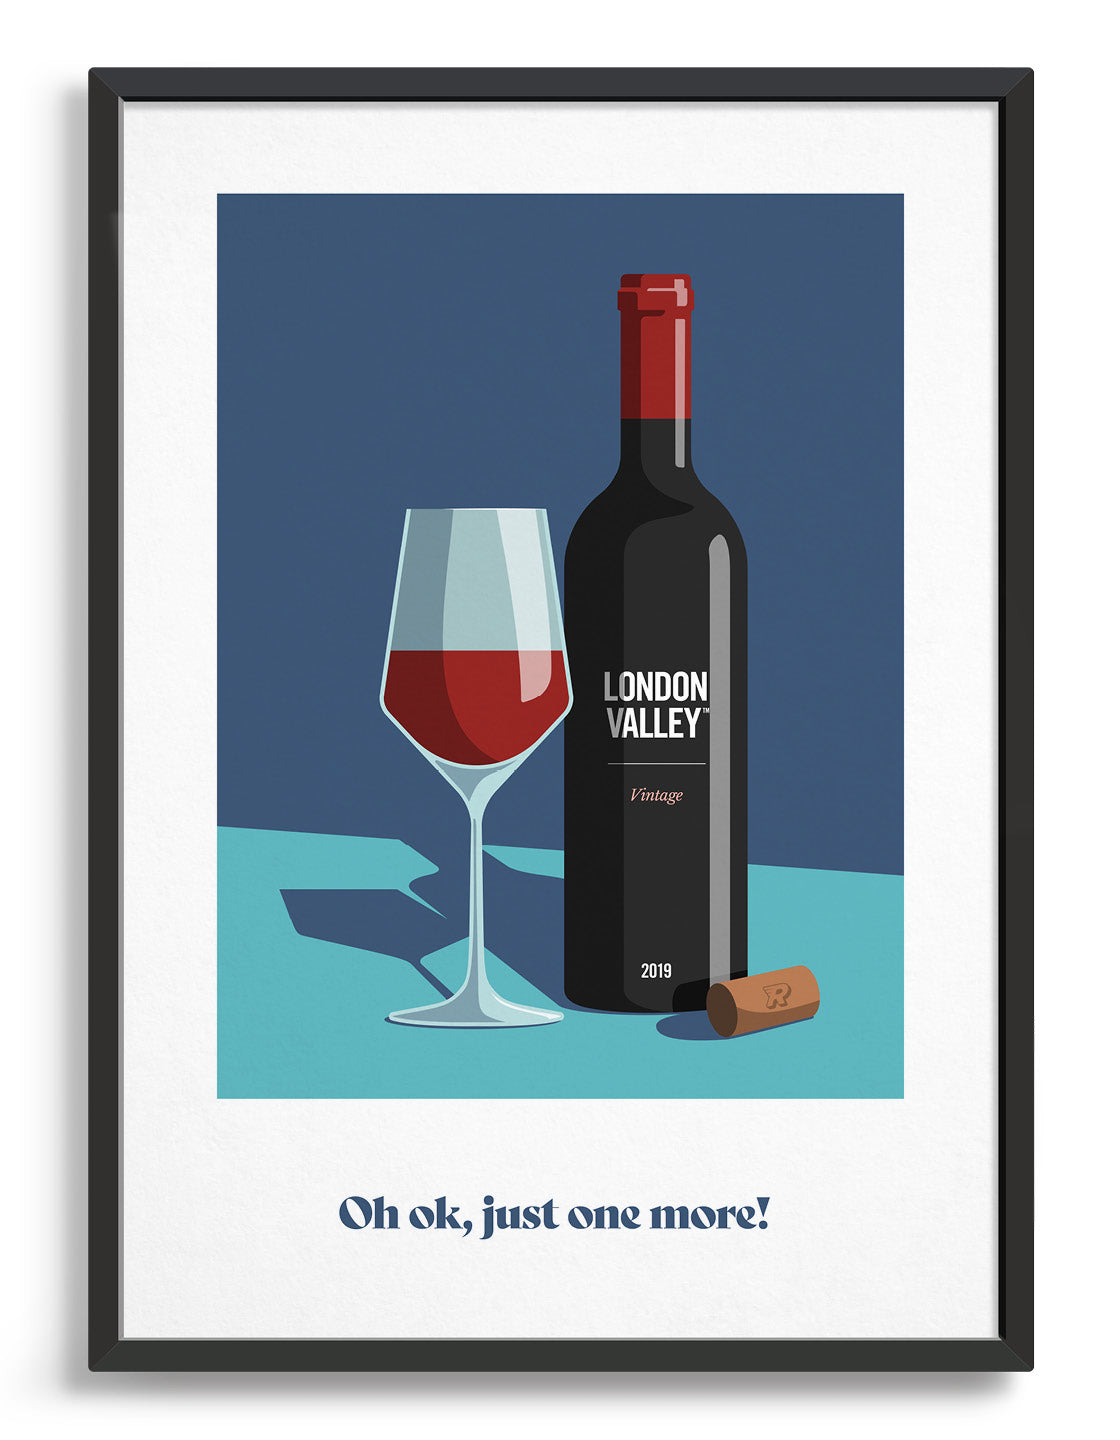 red wine bottle Personalised art print. Add custom text to four areas on the bottle. Depicted against a dark blue and turquoise background with a glass half full of wine and a cork on the side